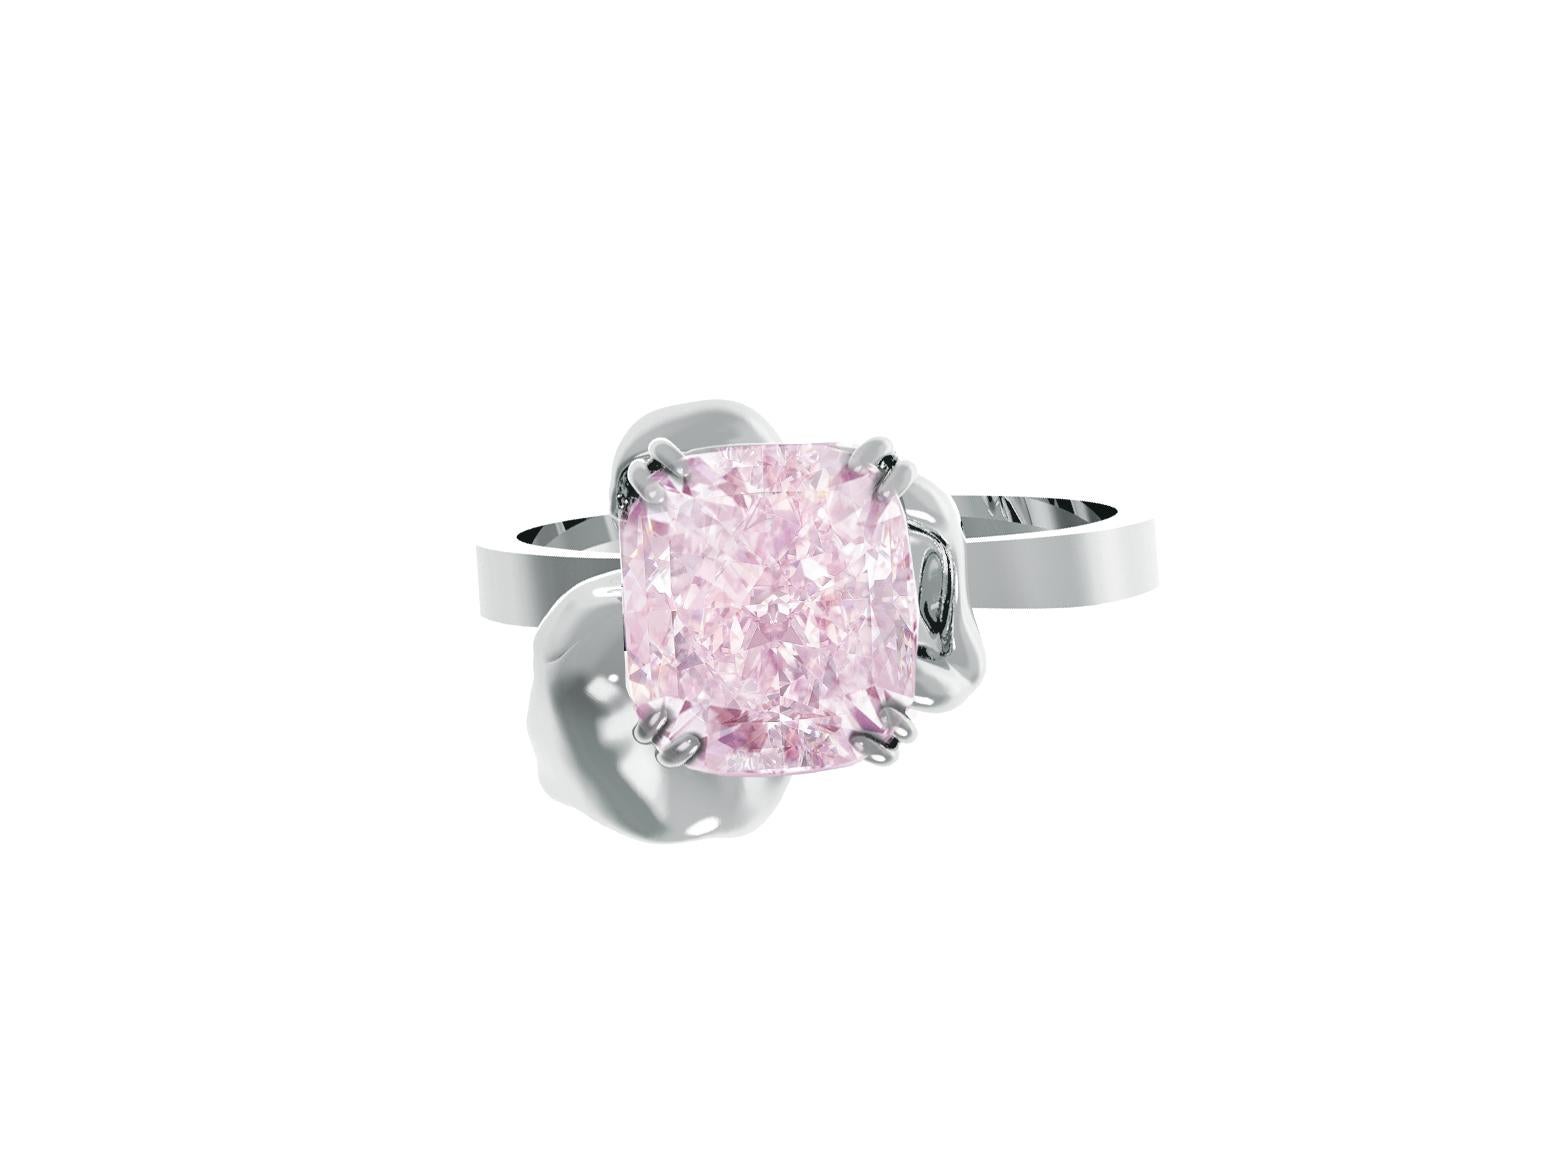 This contemporary Bridal Buttercup ring is a true work of art designed by oil painter Polya Medvedeva. The ring is crafted in 18 karat white gold and features a stunning GIA certified 0.8 carat fancy light purplish pink diamond with exceptional